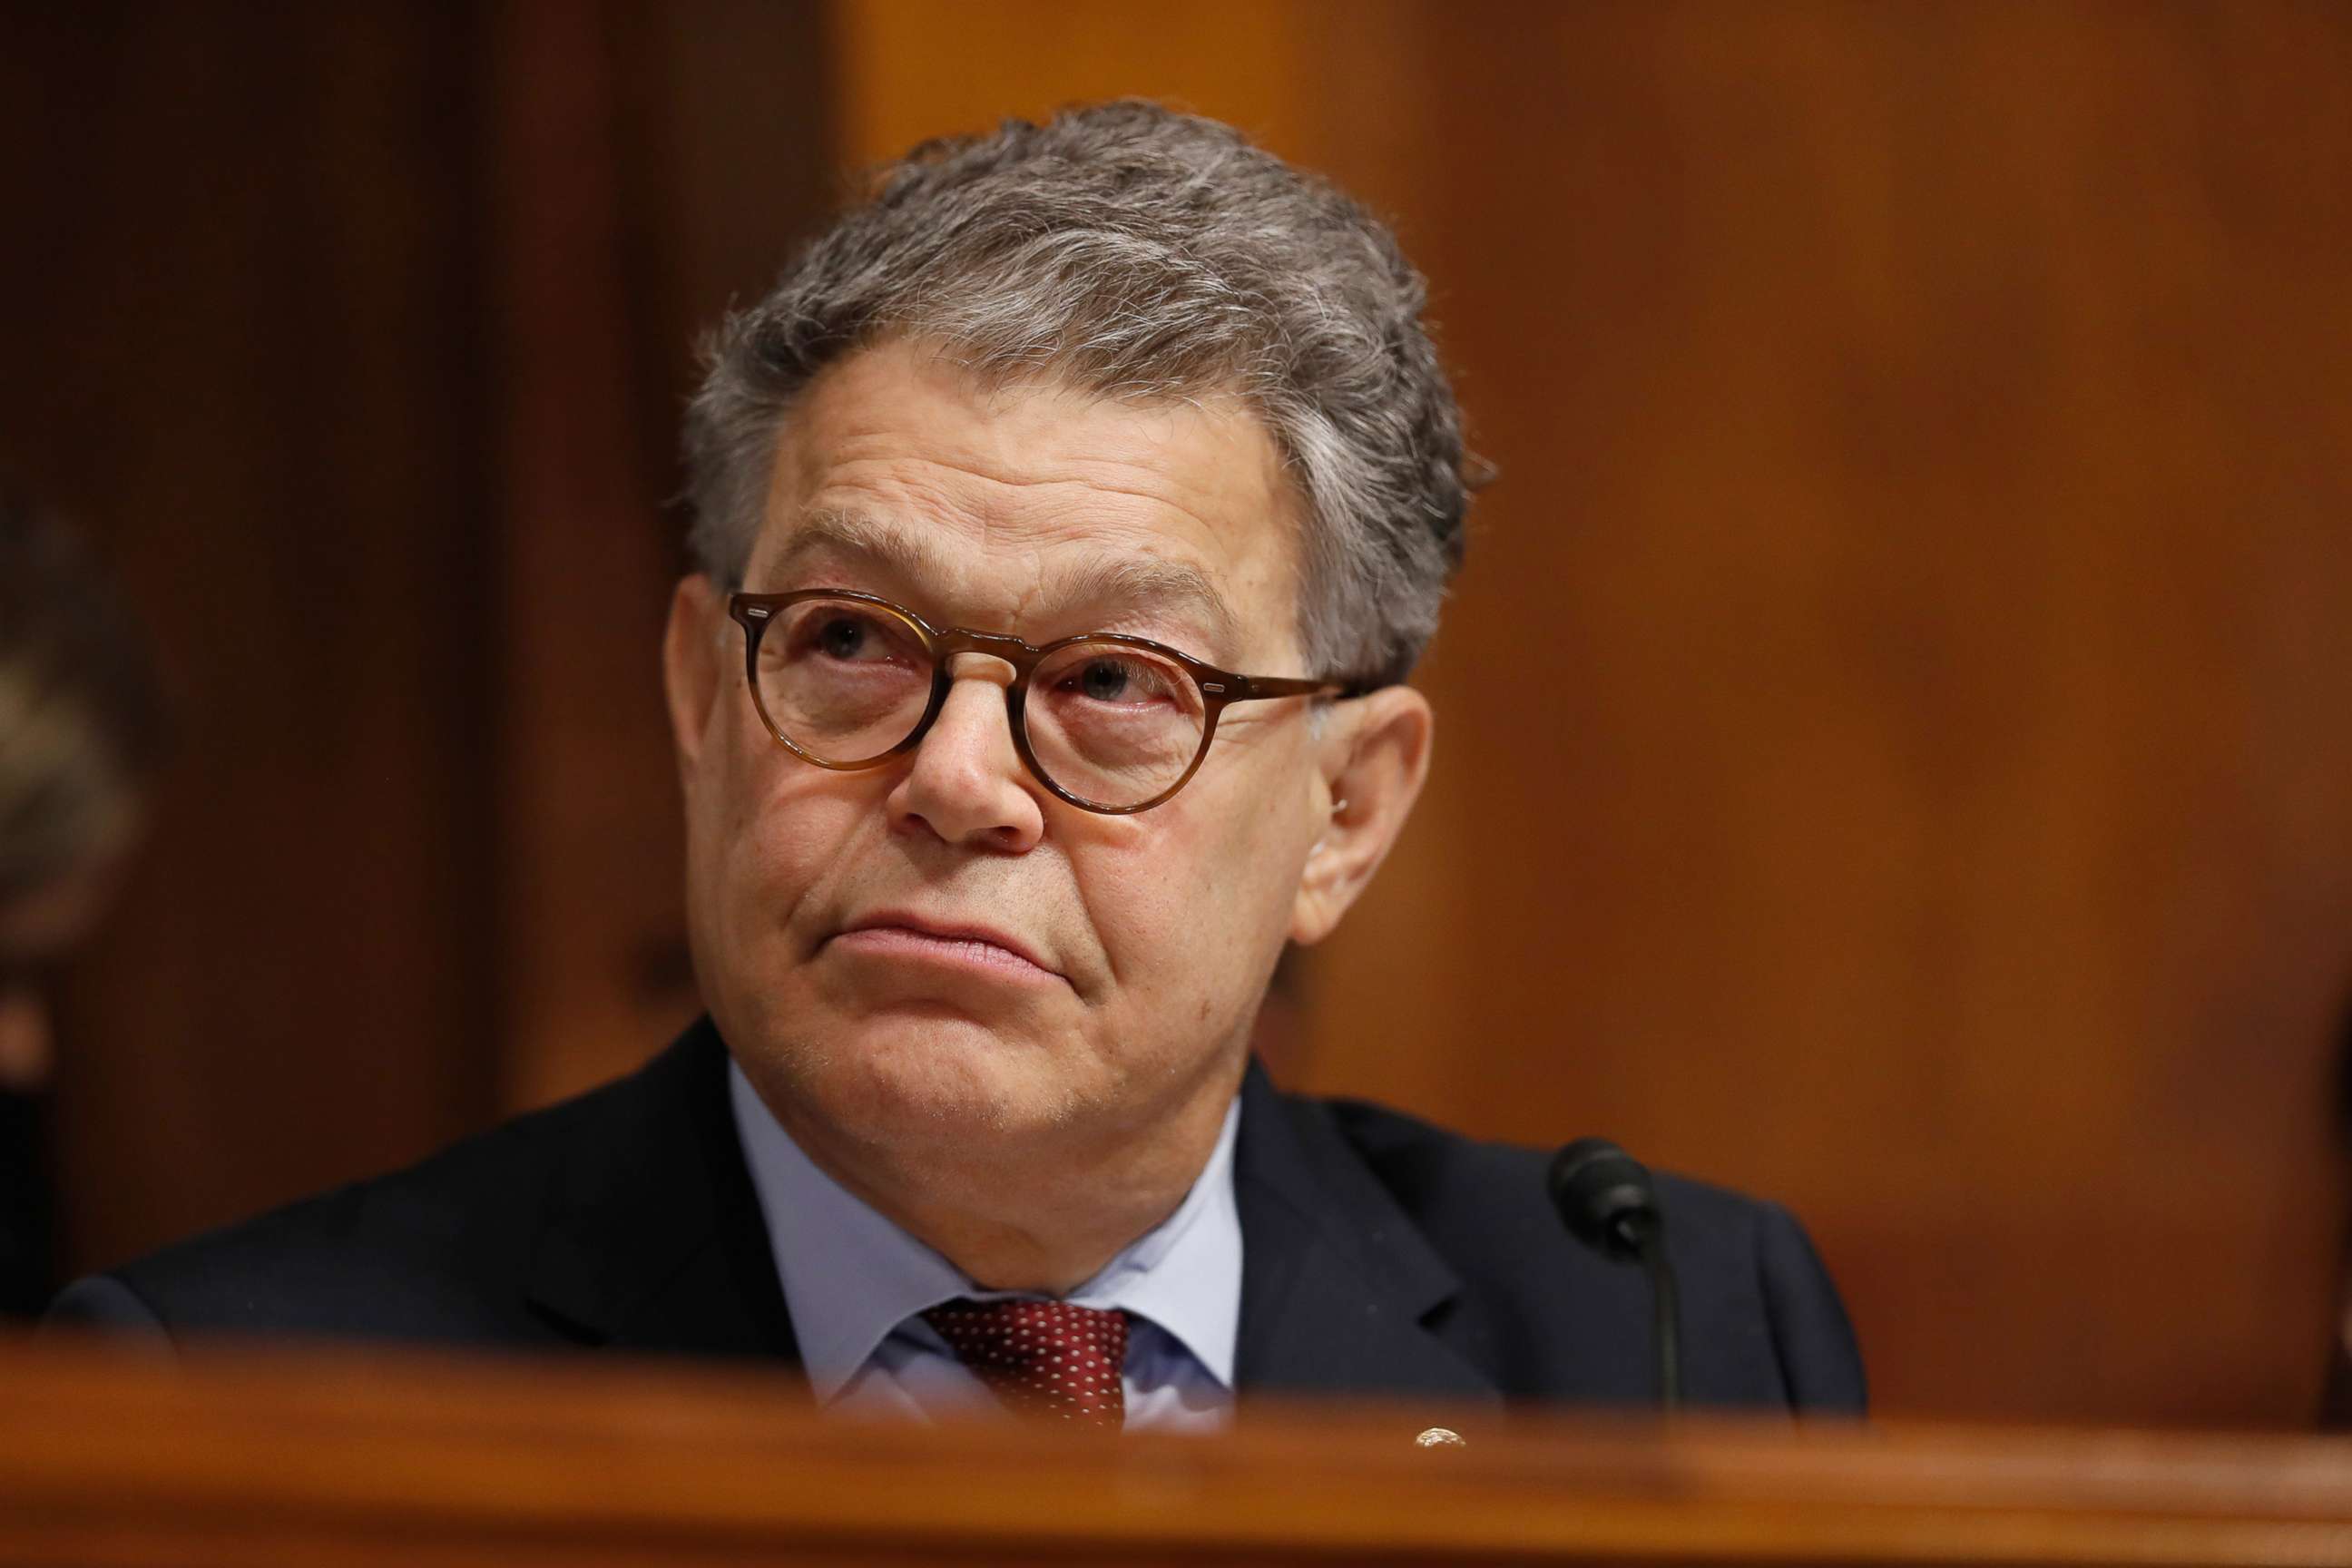 PHOTO: Sen. Al Franken listens during a Senate Judiciary Committee hearing on Capitol Hill, Sept. 20, 2017 in Washington.